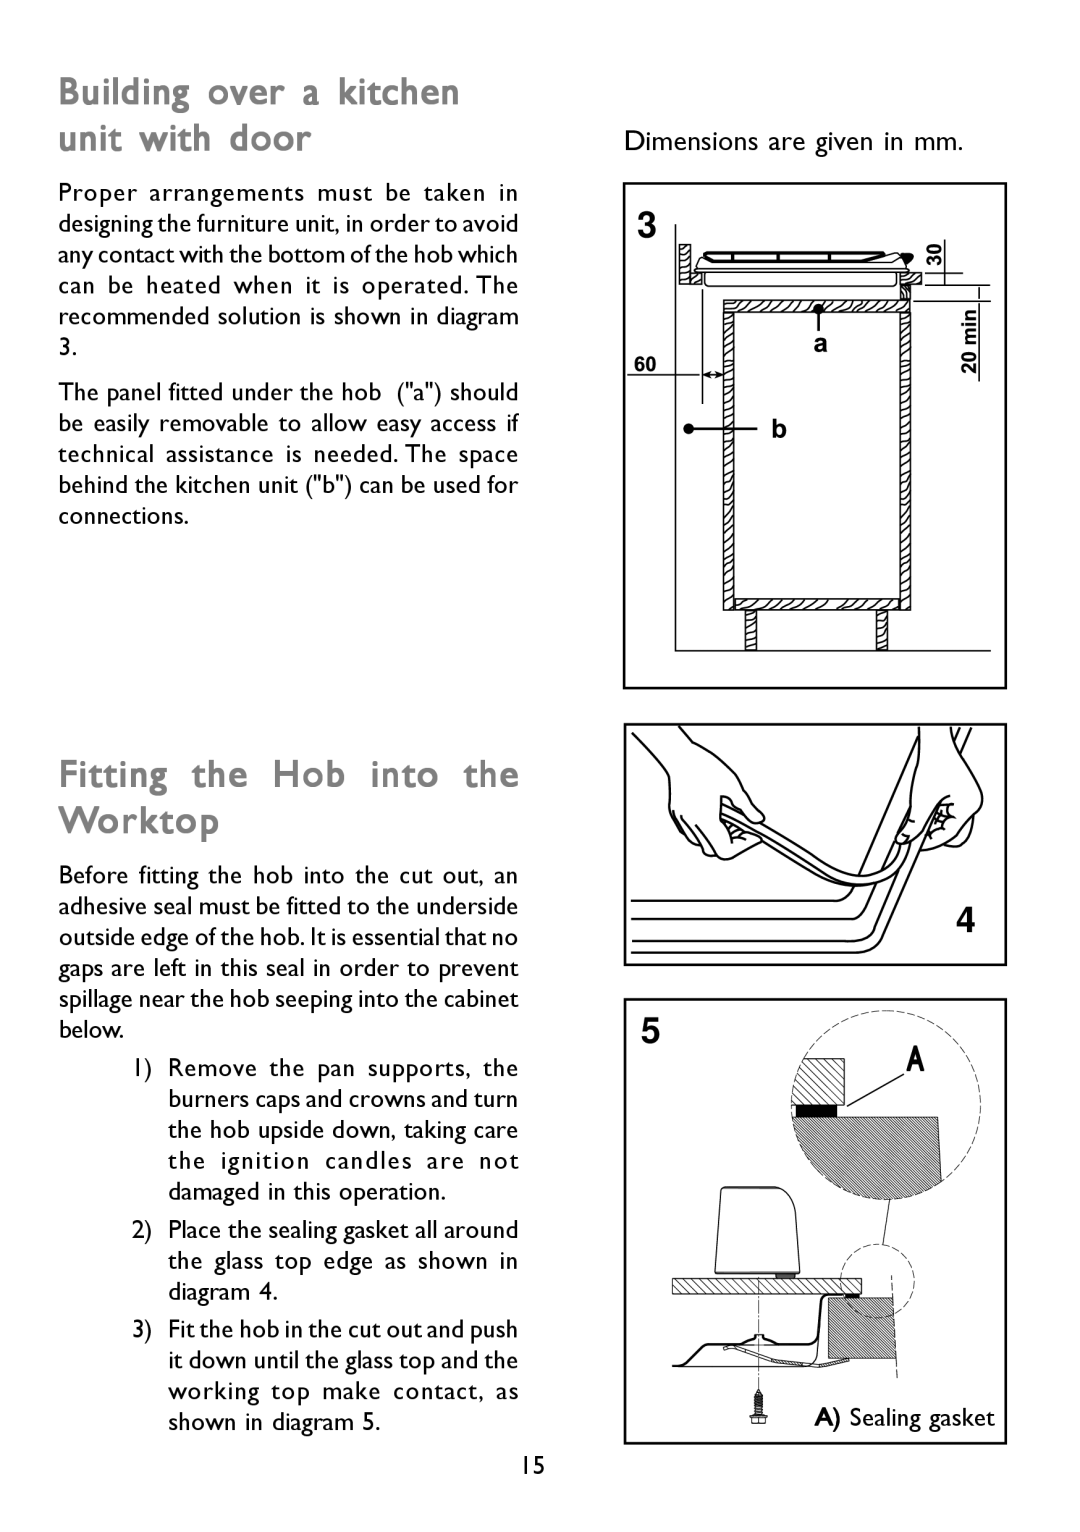 John Lewis JLBIGGH605 instruction manual Building over a kitchen unit with door, Fitting the Hob into the Worktop 